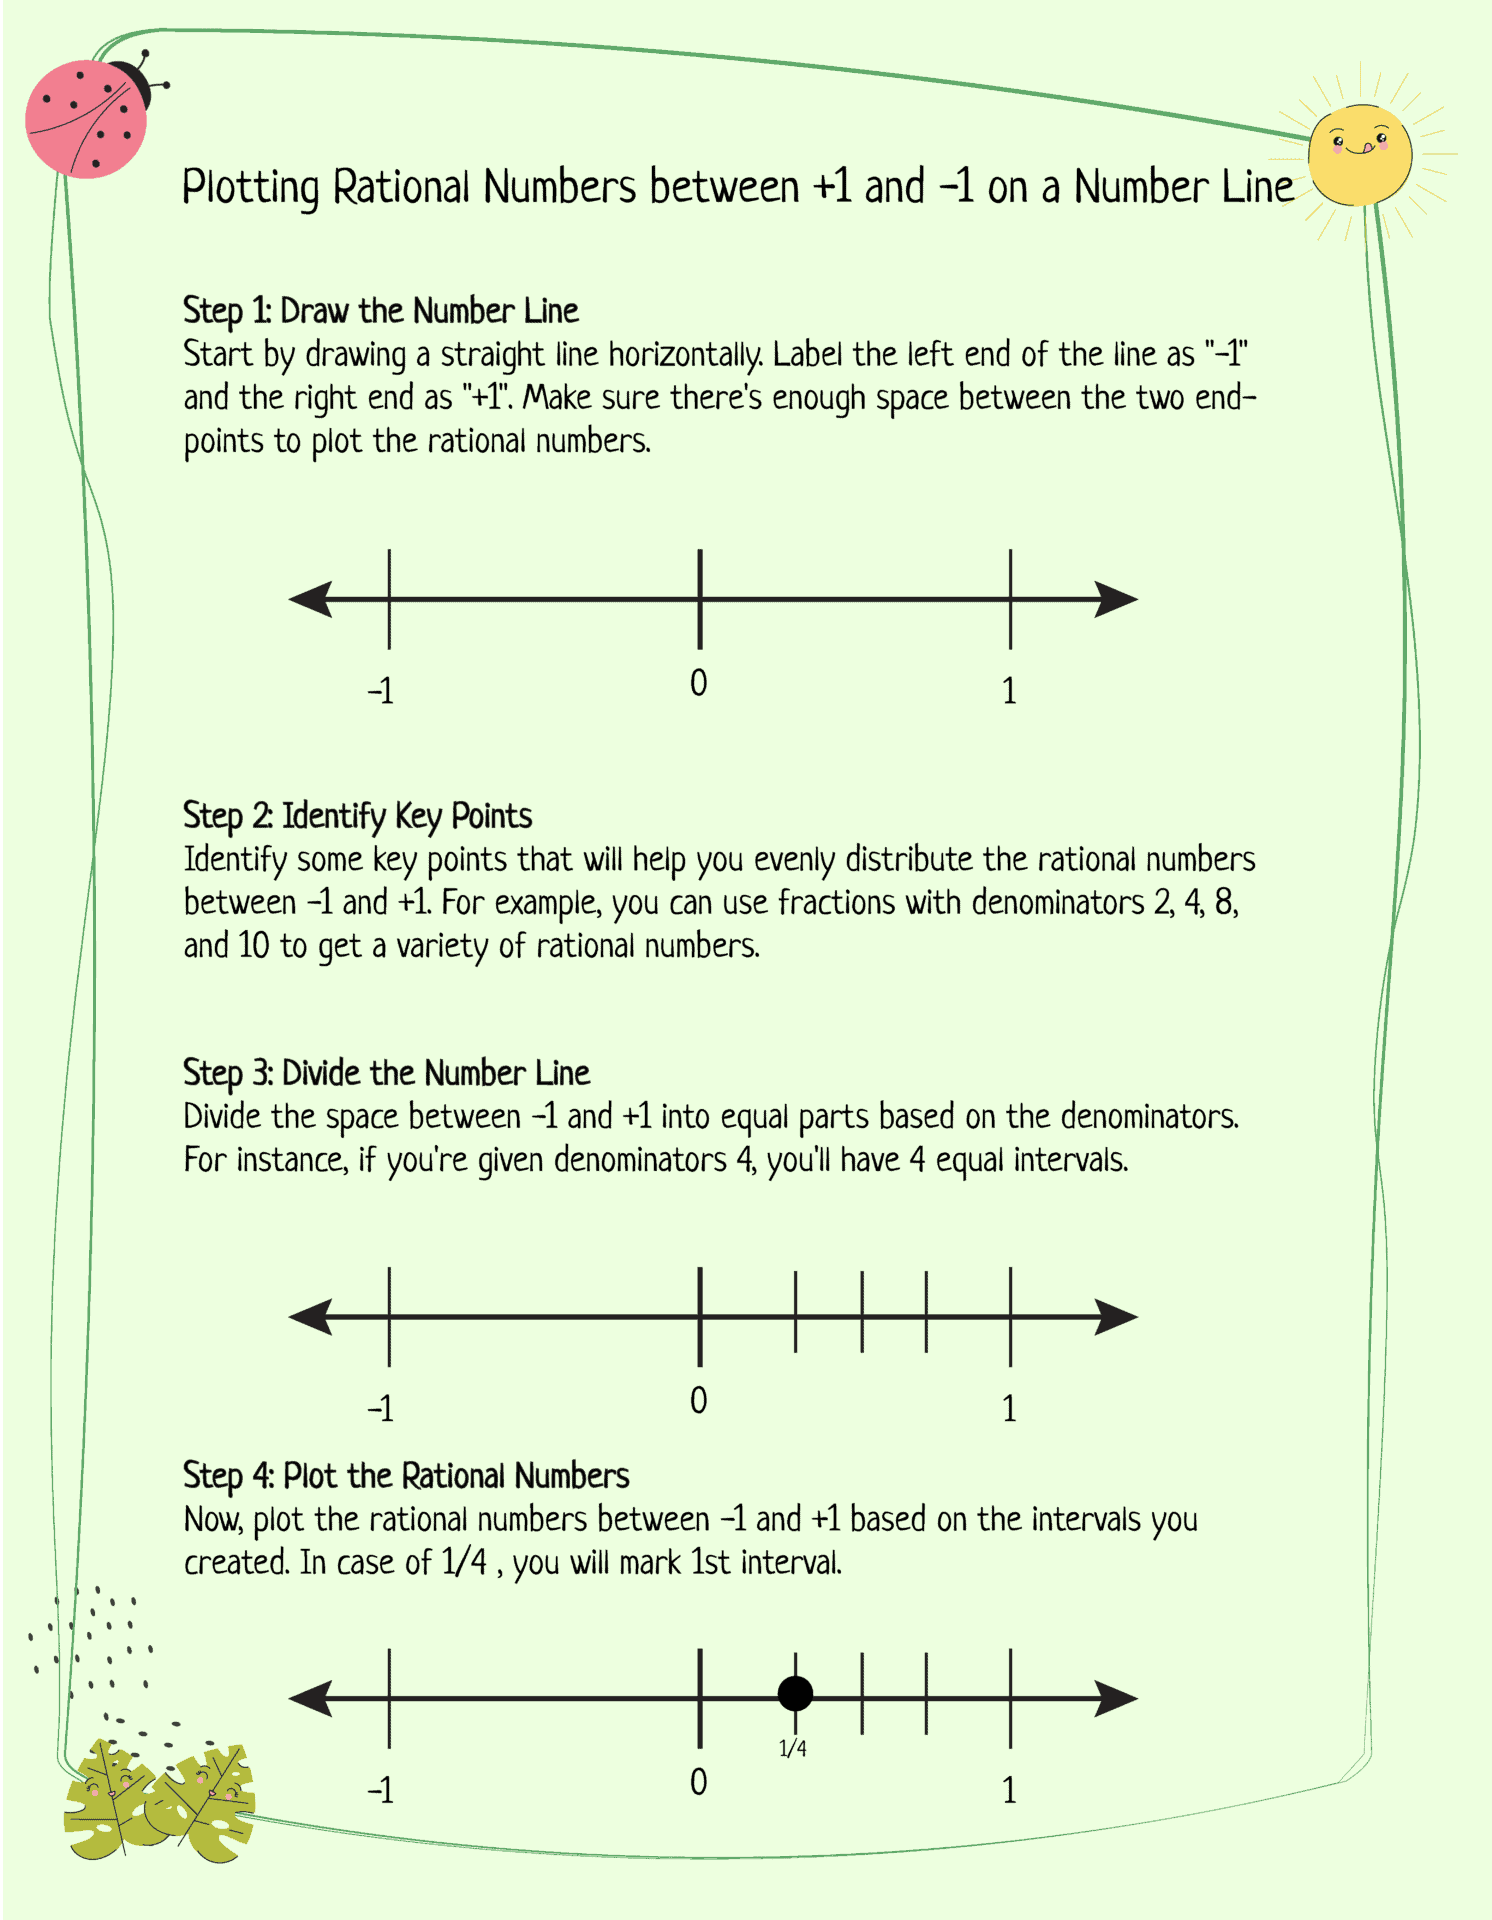 6-free-plotting-rational-numbers-on-a-number-line-worksheet